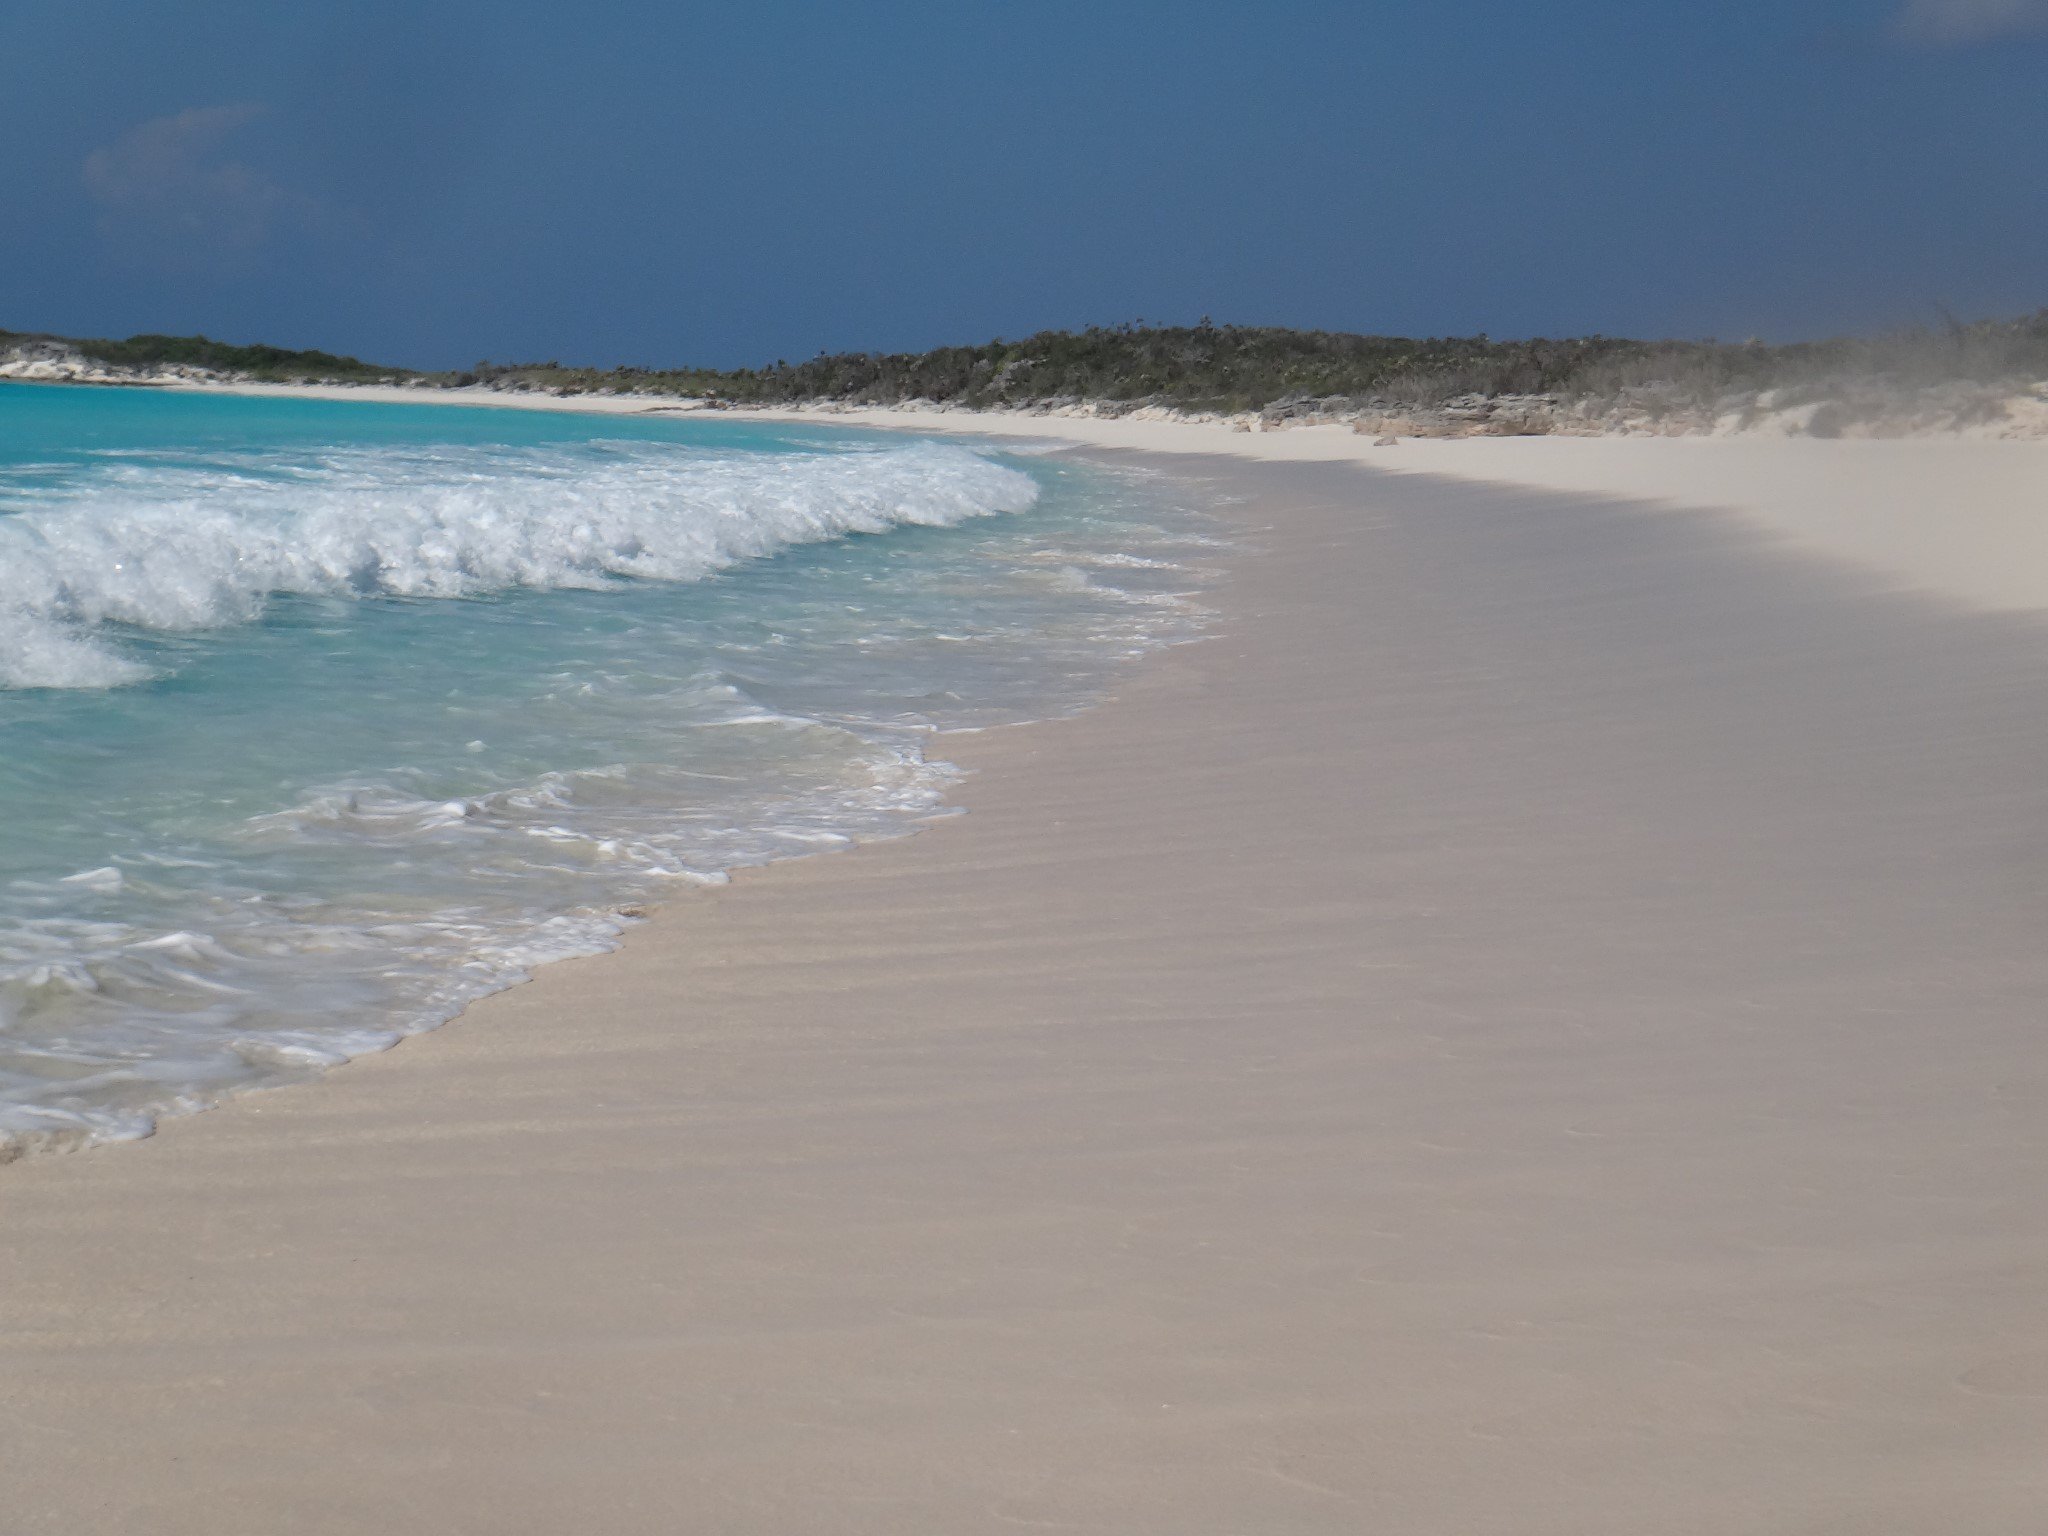 WHEN THE NORTH SWELL ROLLS IN ANEGADA BEACHES FOR BODY SURFING!